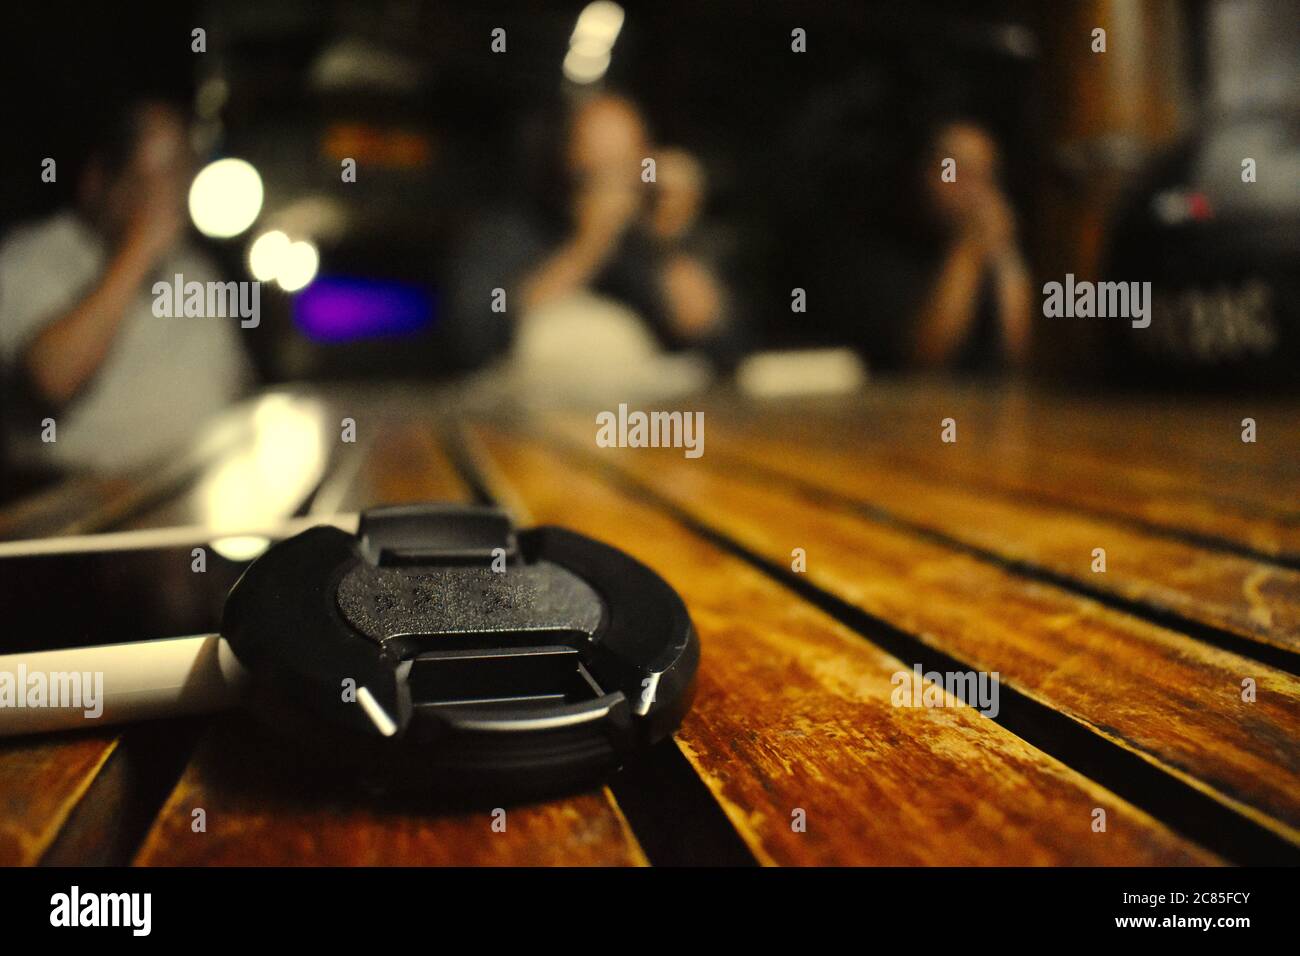 Black cover for a camera lens on a wooden table in a pub Stock Photo